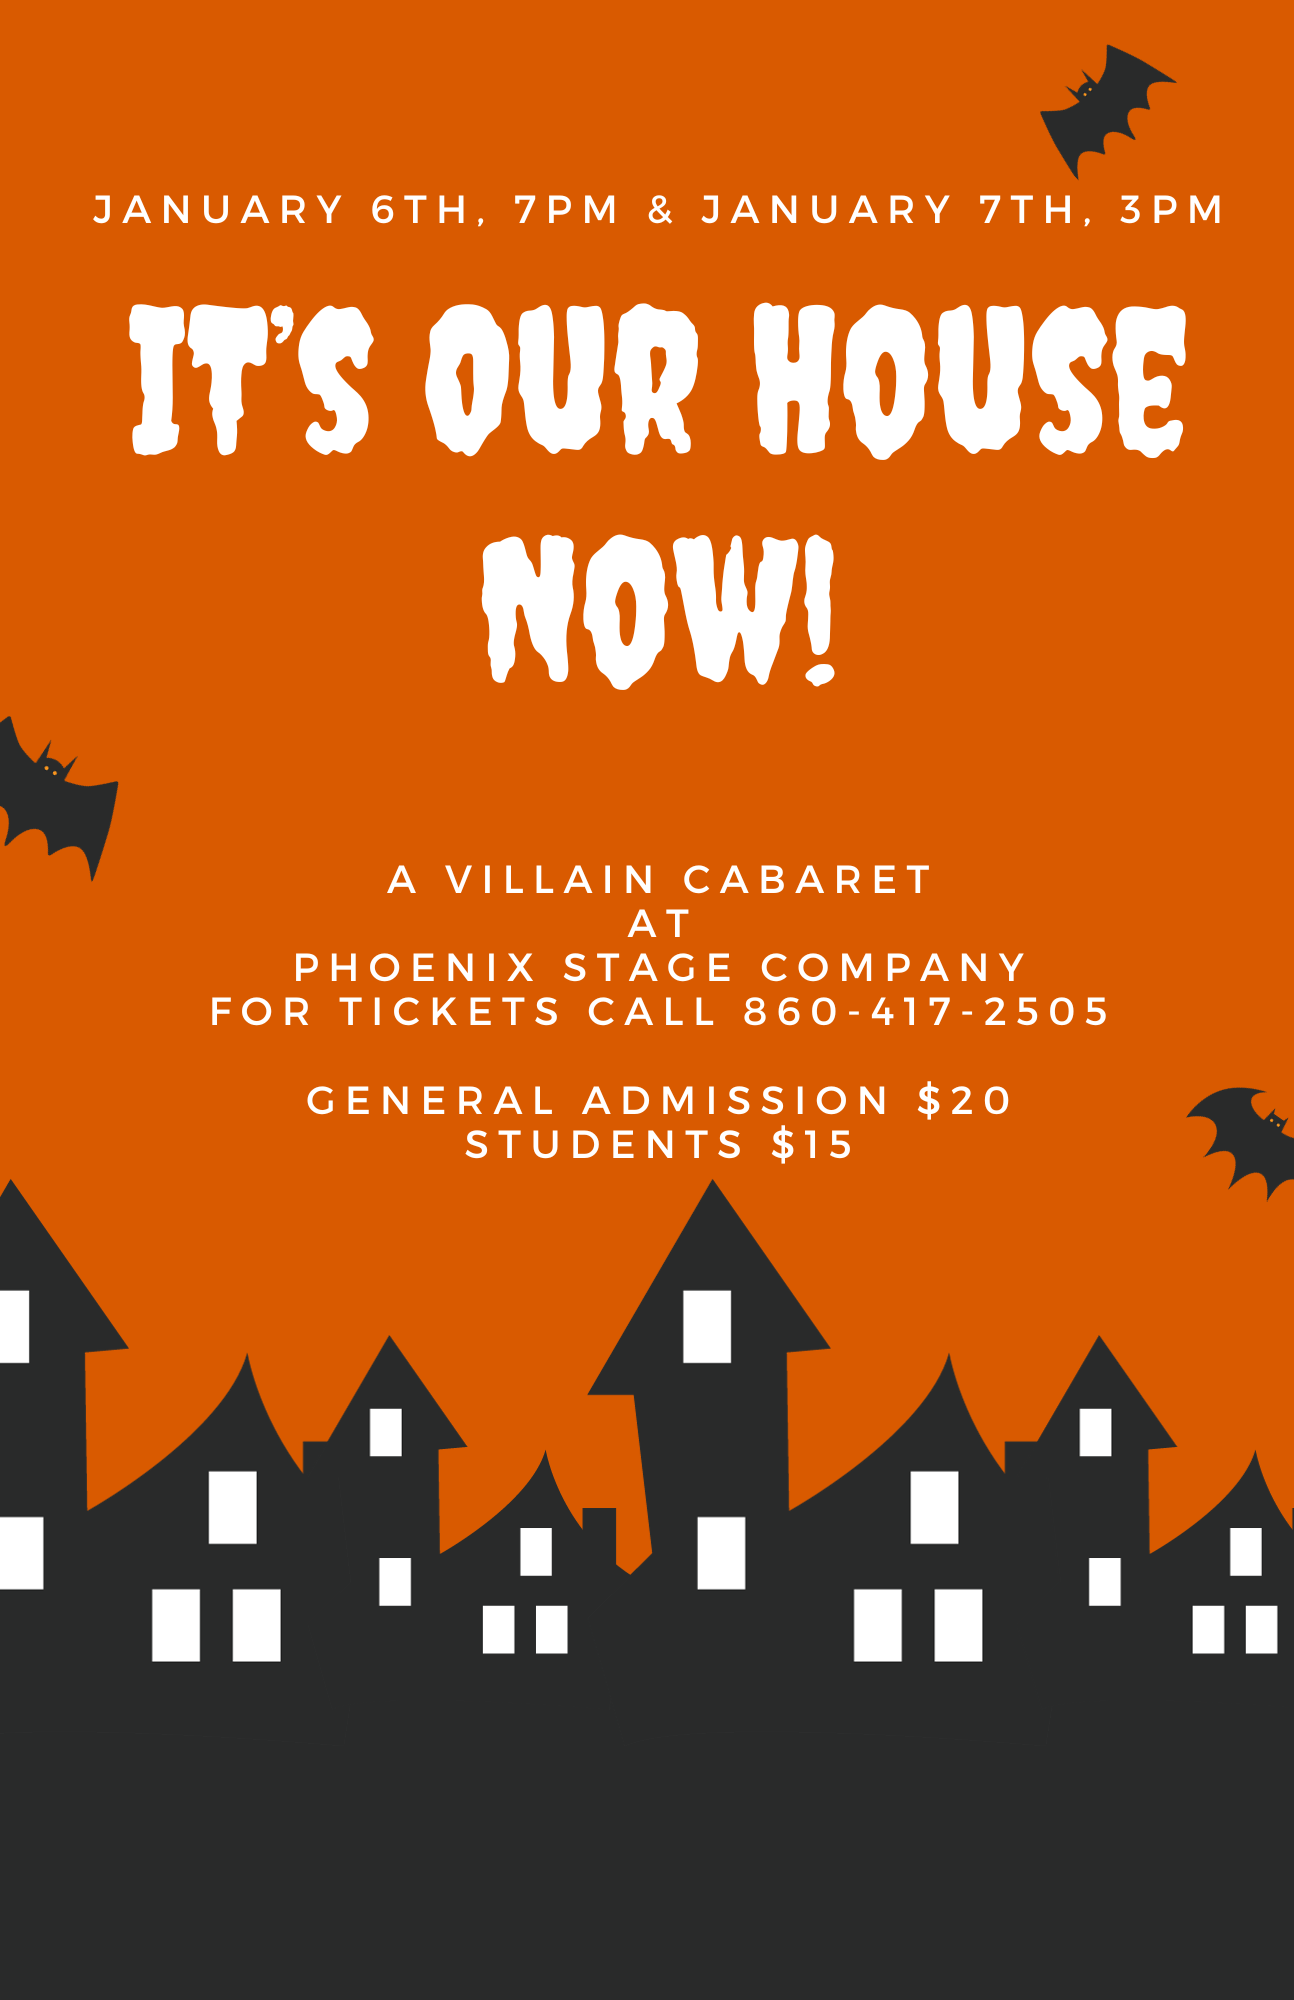 IT'S OUR HOUSE NOW! A Villain Cabaret on Jan 06, 19:00@Phoenix Stage Company - Buy tickets and Get information on Phoenix Stage Company phoenixstagecompany